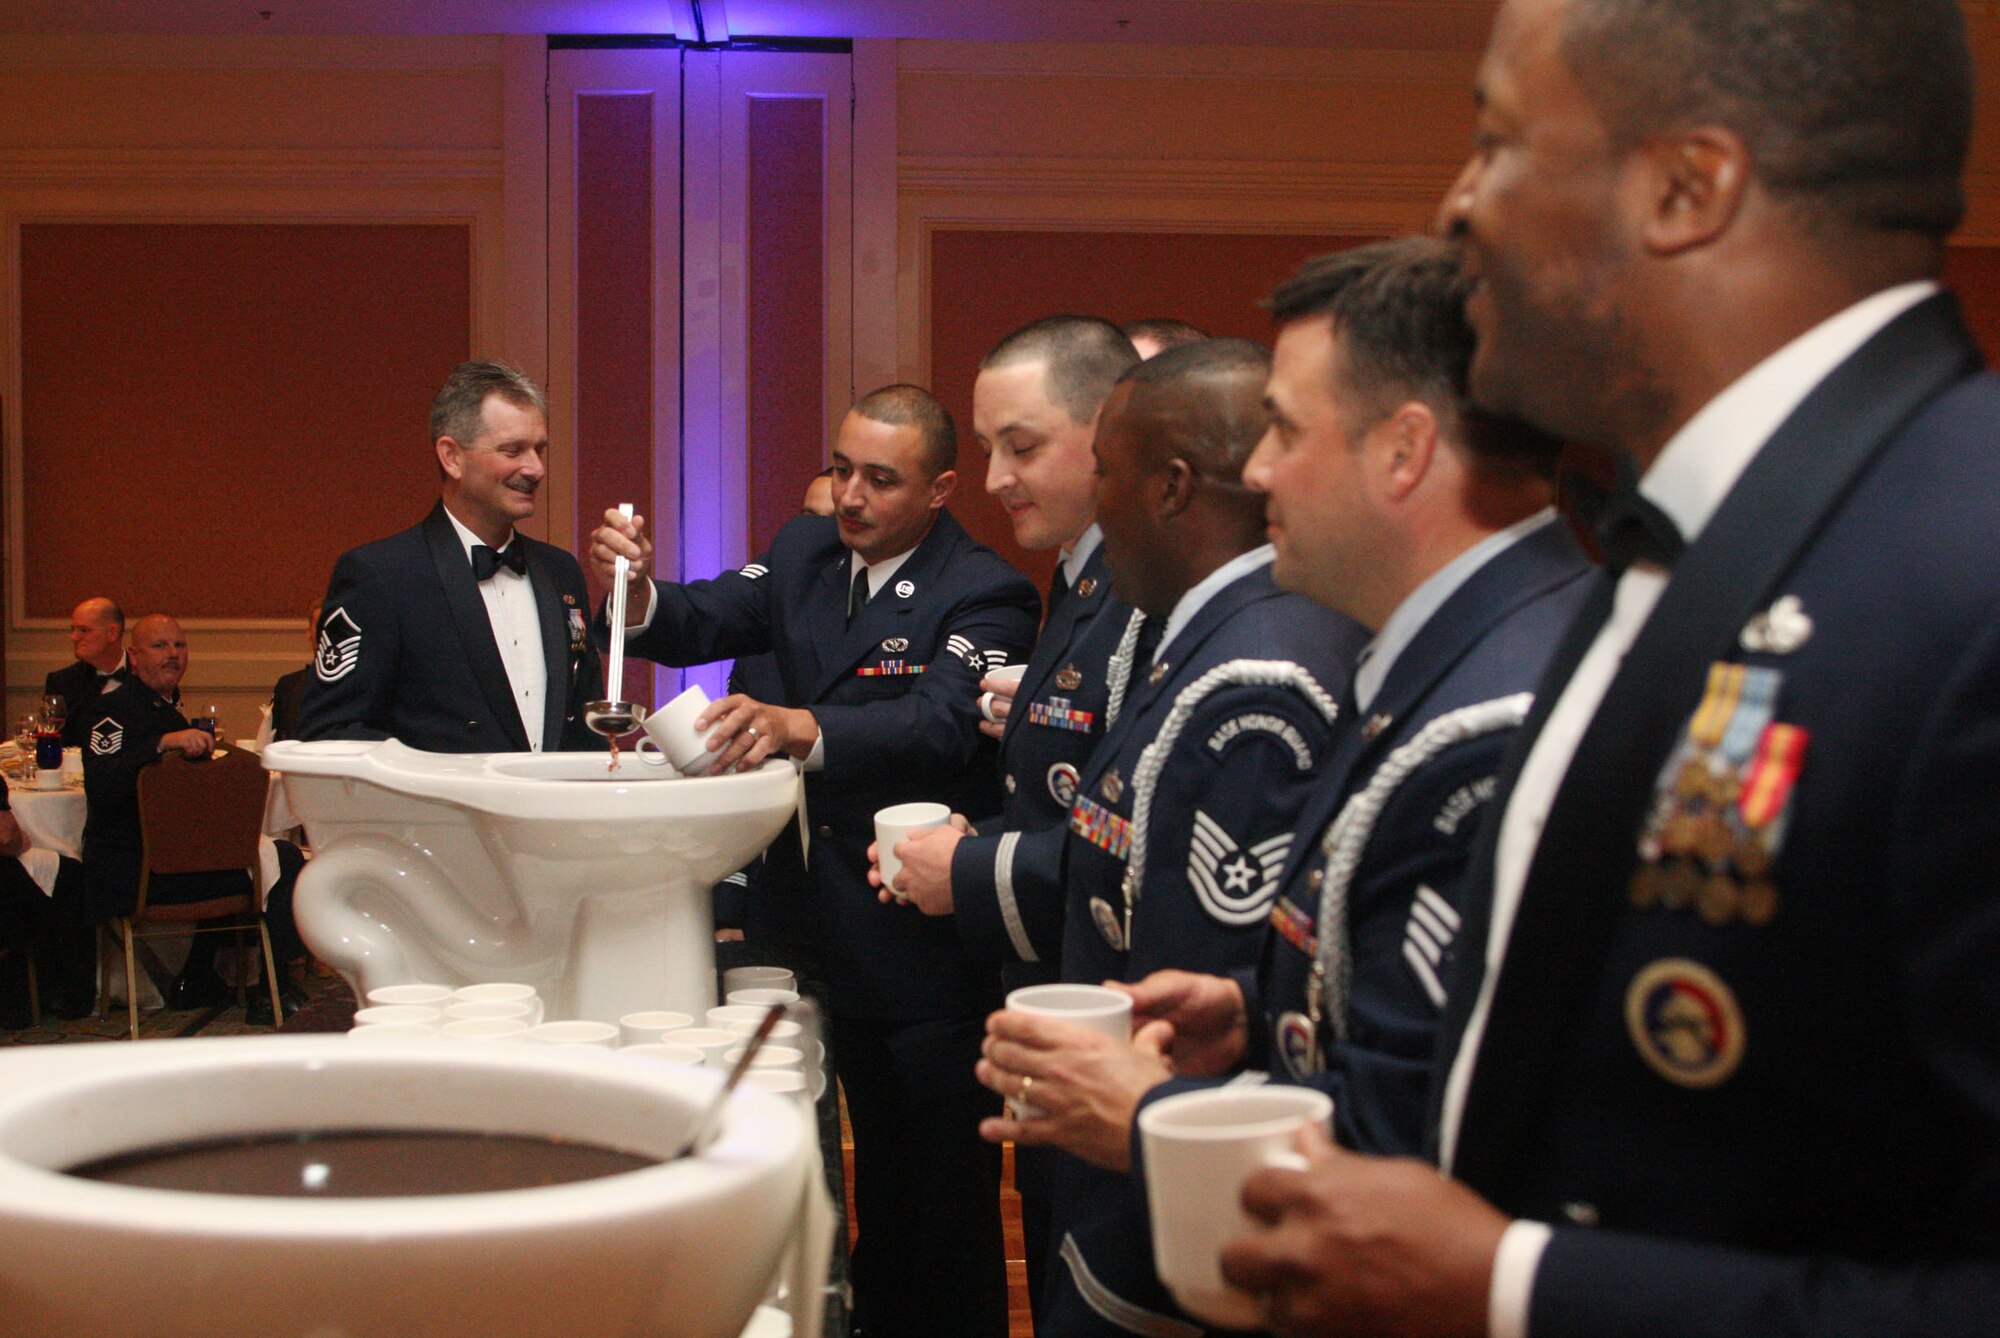 Members of the 94th Airlift Wing Honor Guard take their turn at the grog during the 94th Airlift Wing Dining Out held in downtown Atlanta, Ga., Oct. 1. (U.S. Air Force photo/Don Peek)